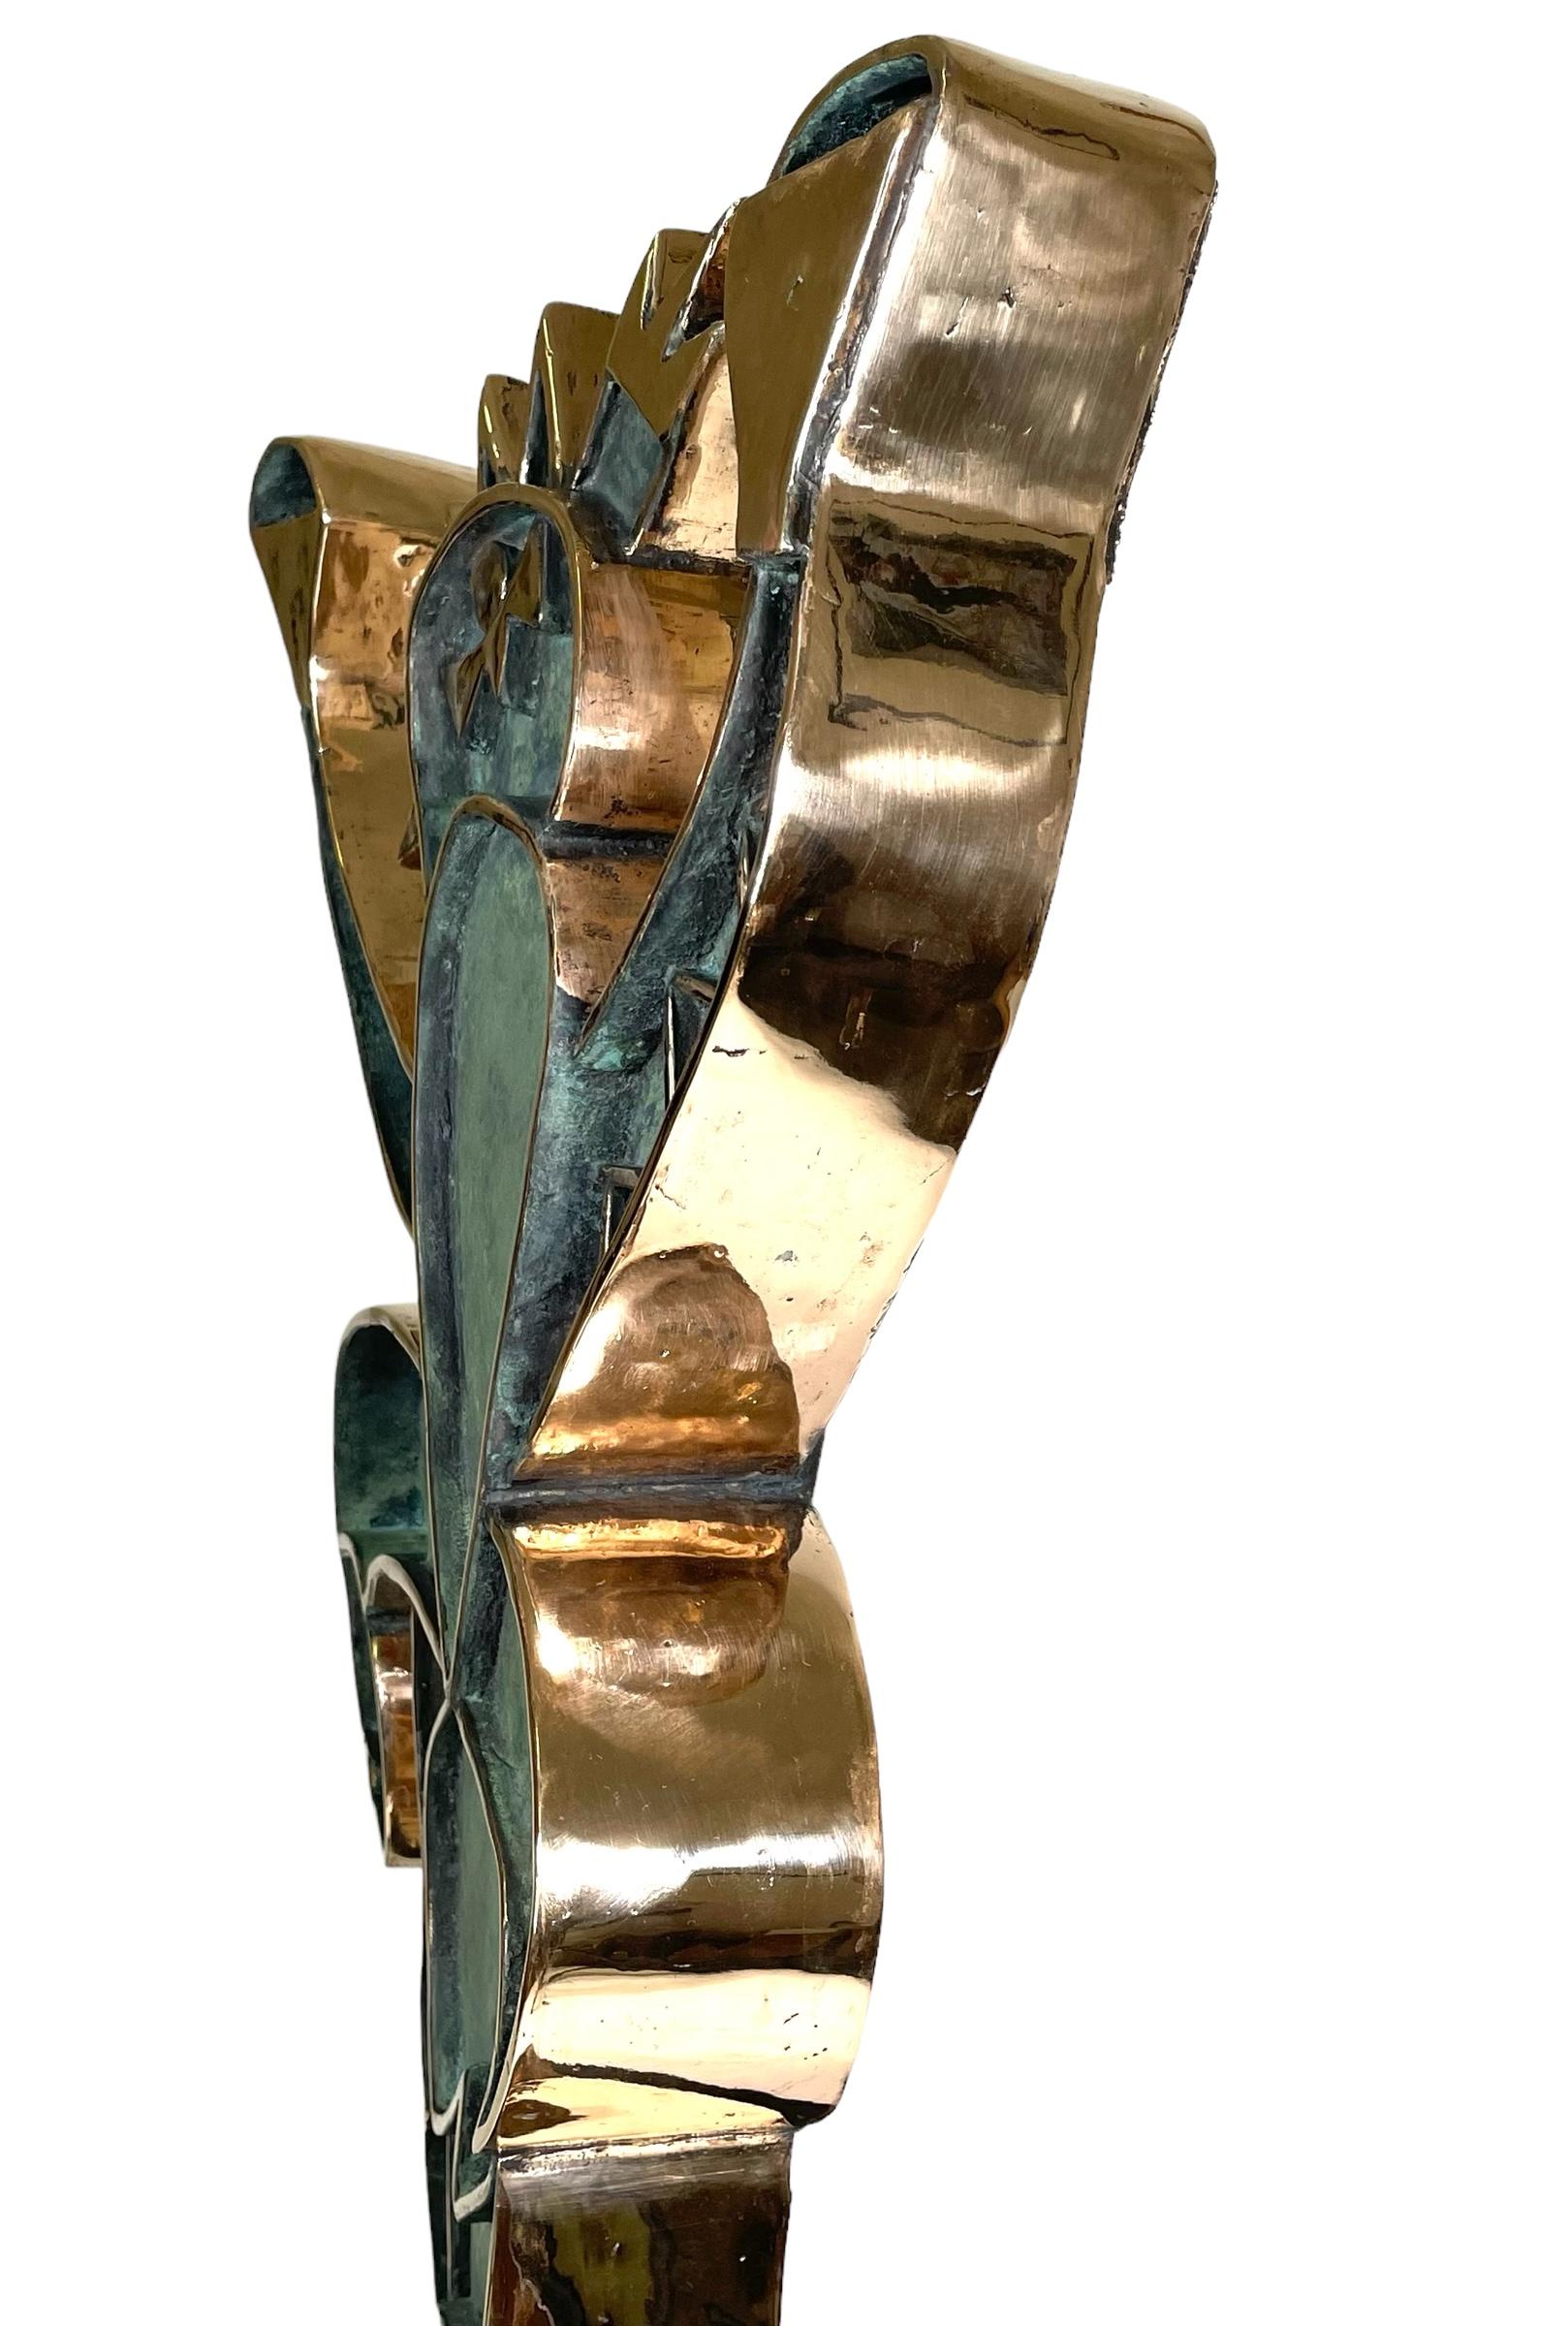 Numbered and limited to 12 copies ( 8 + 4 )
Artwork signed
Authenticity: Sold with certificate of Authenticity from the gallery
Invoice from the gallery
Sculpture: bronze, metal, bronze patina

Display: The sculpture can't be displayed outdoors